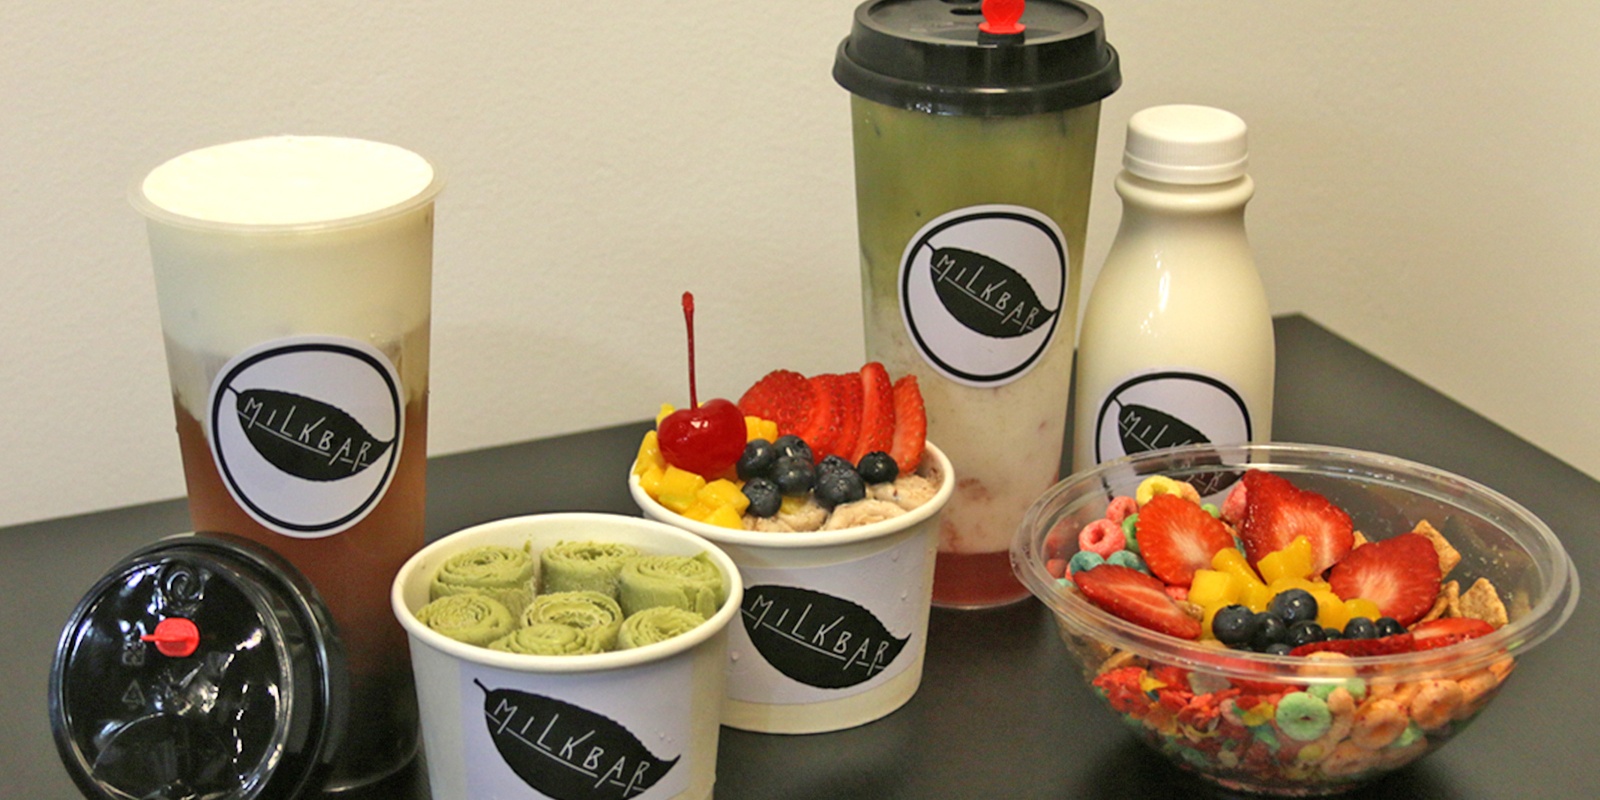 Milkbar Offerings including coffee and cereal bowls